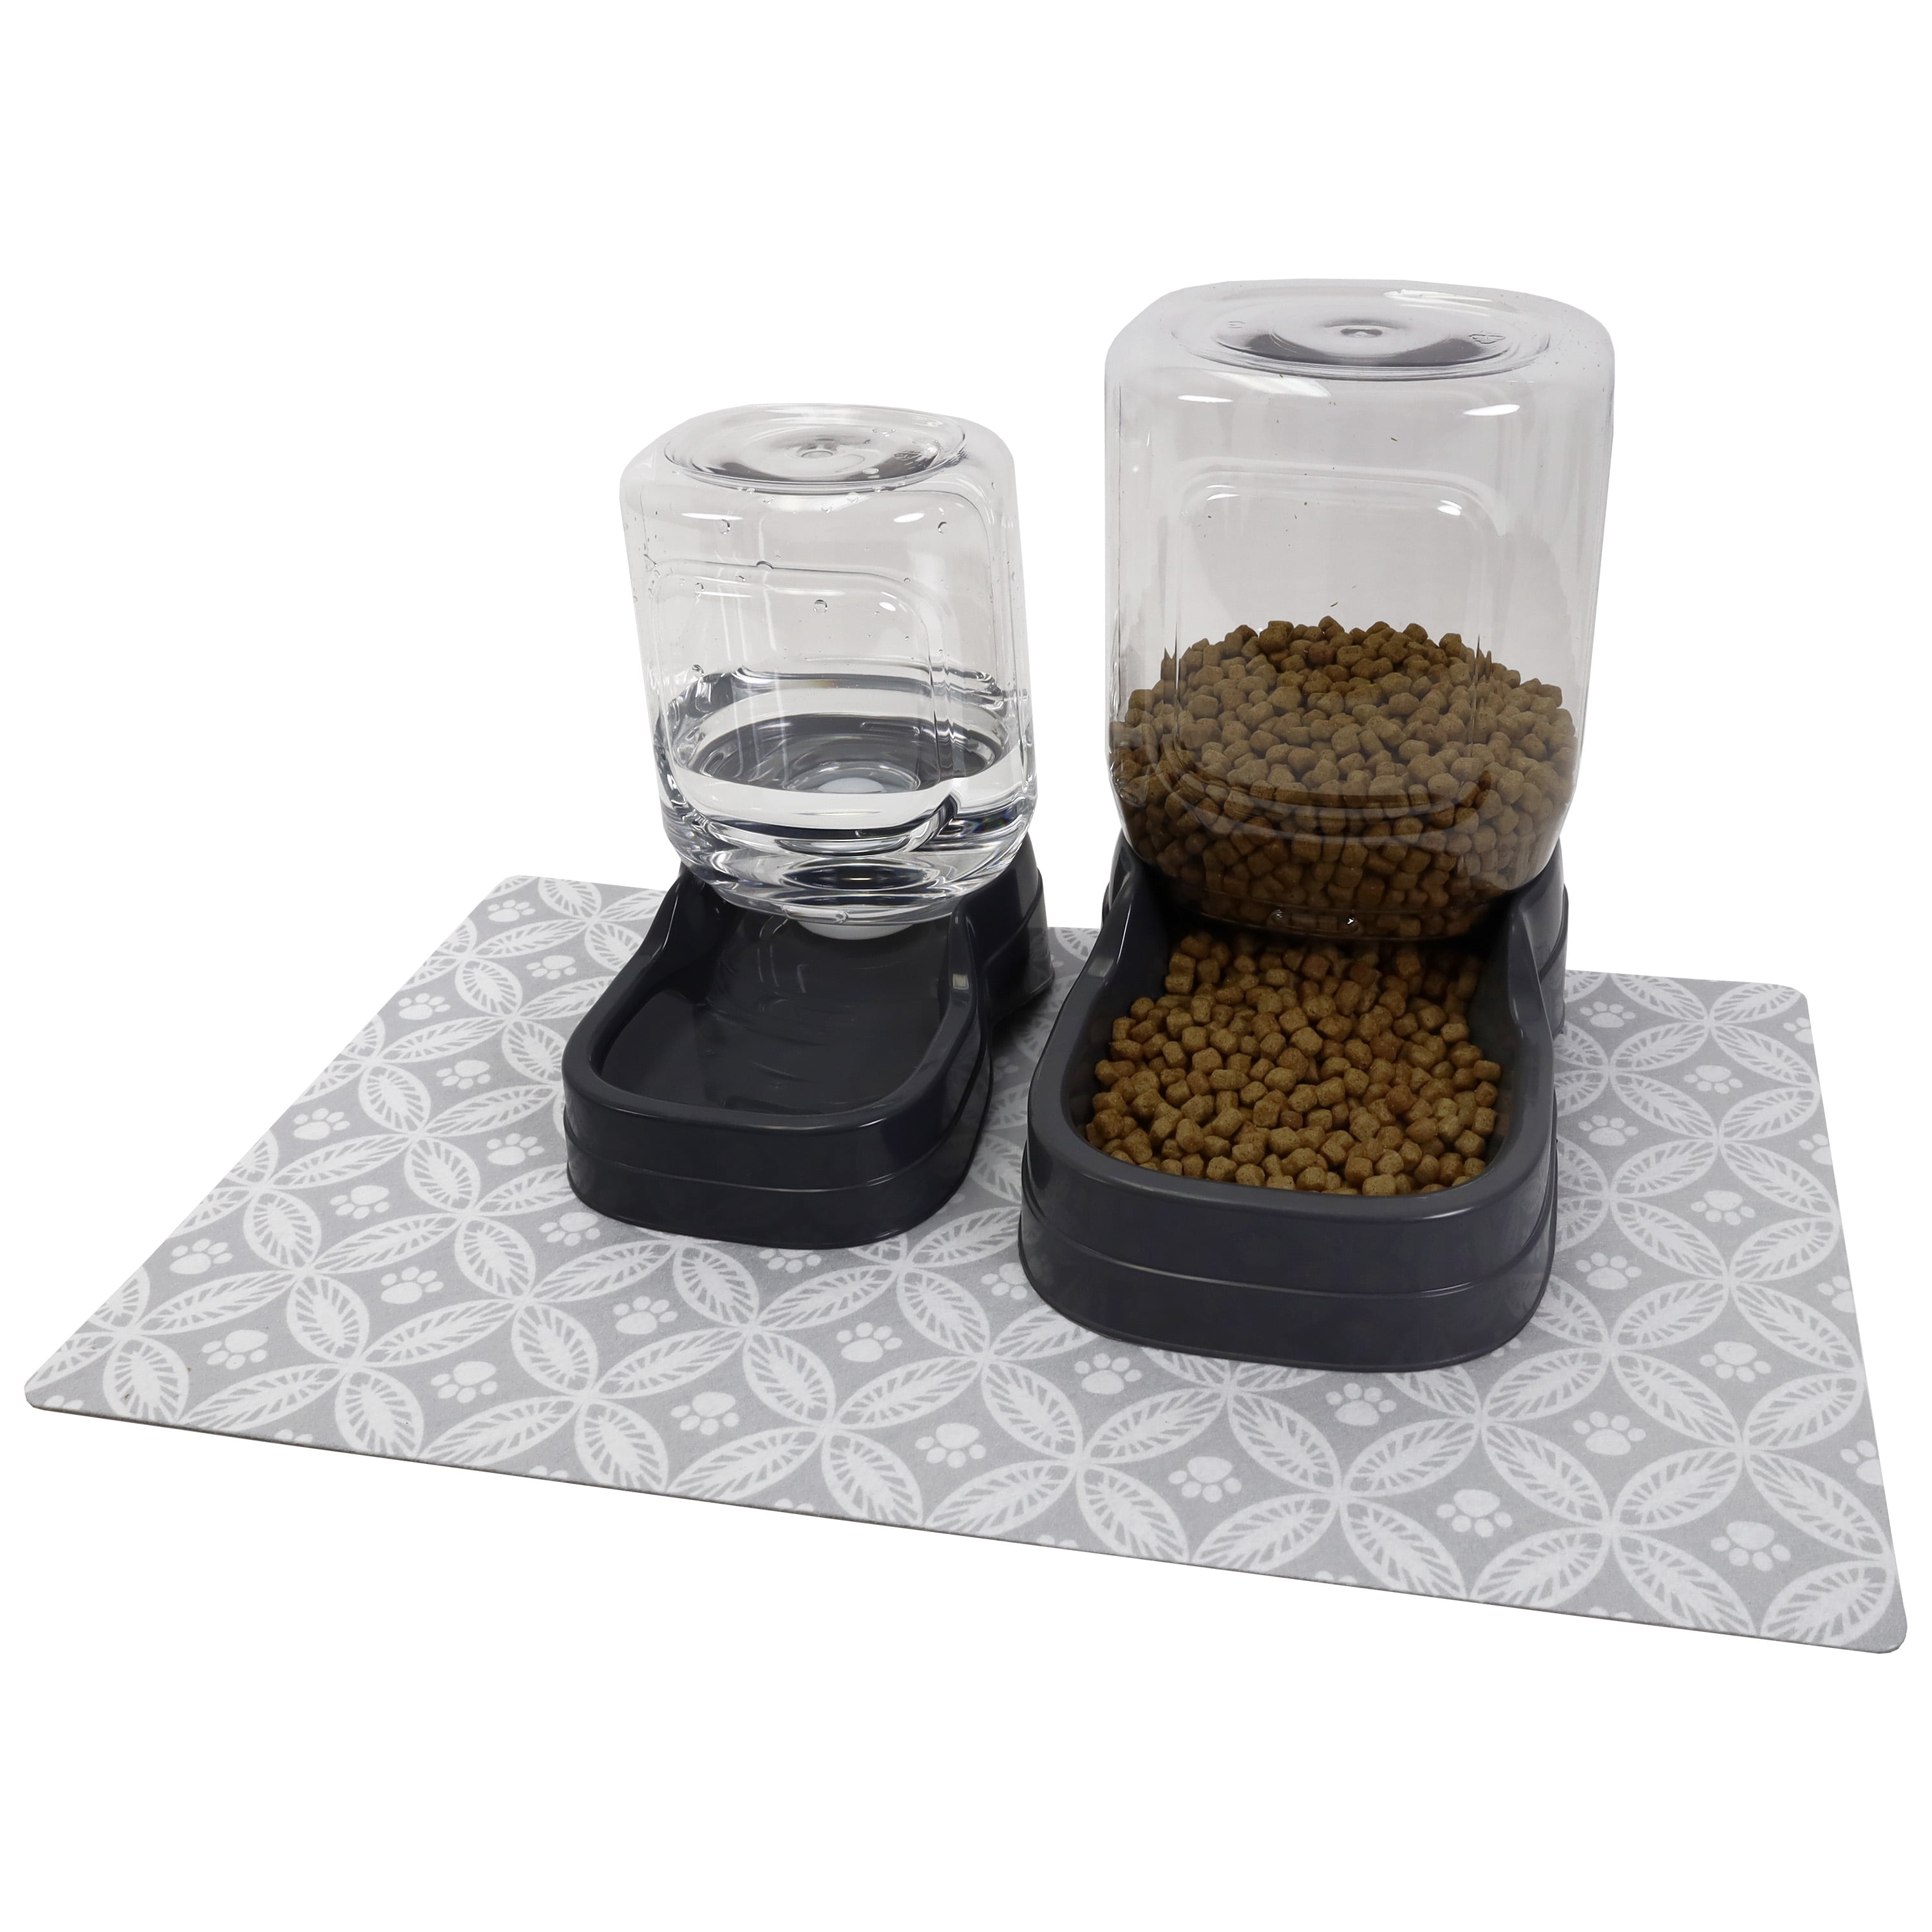 Drymate Pet Bowl Placemats for Dog & Cat - RPM Drymate - Surface Protection  Products for Your Home